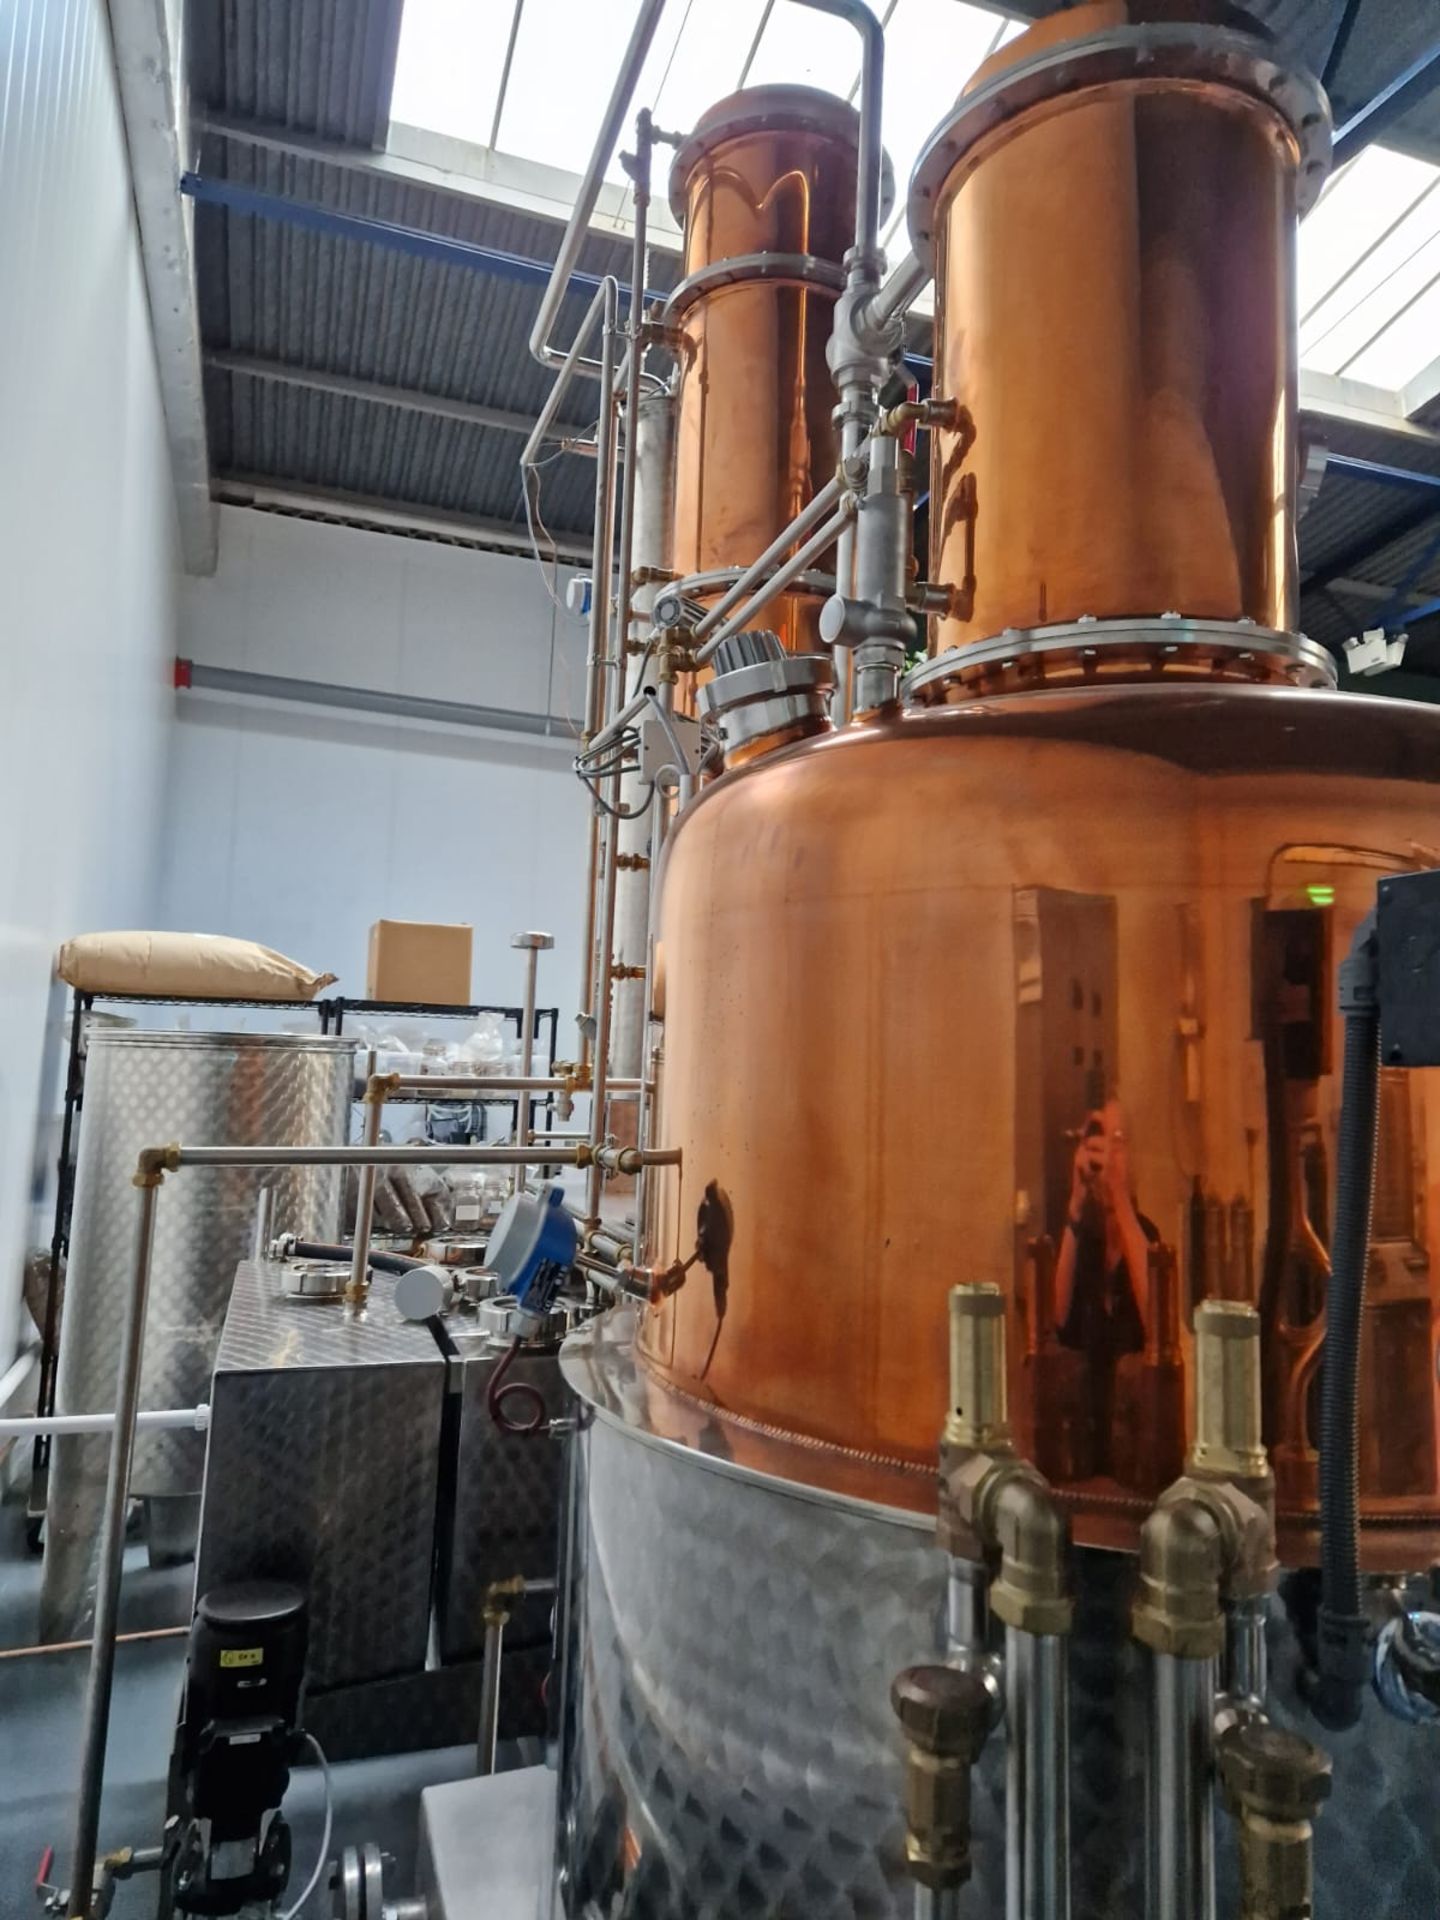 Arnold Holstein SH1000, 450L Pot Still. Installed and commissioned March 2022 - Image 5 of 9